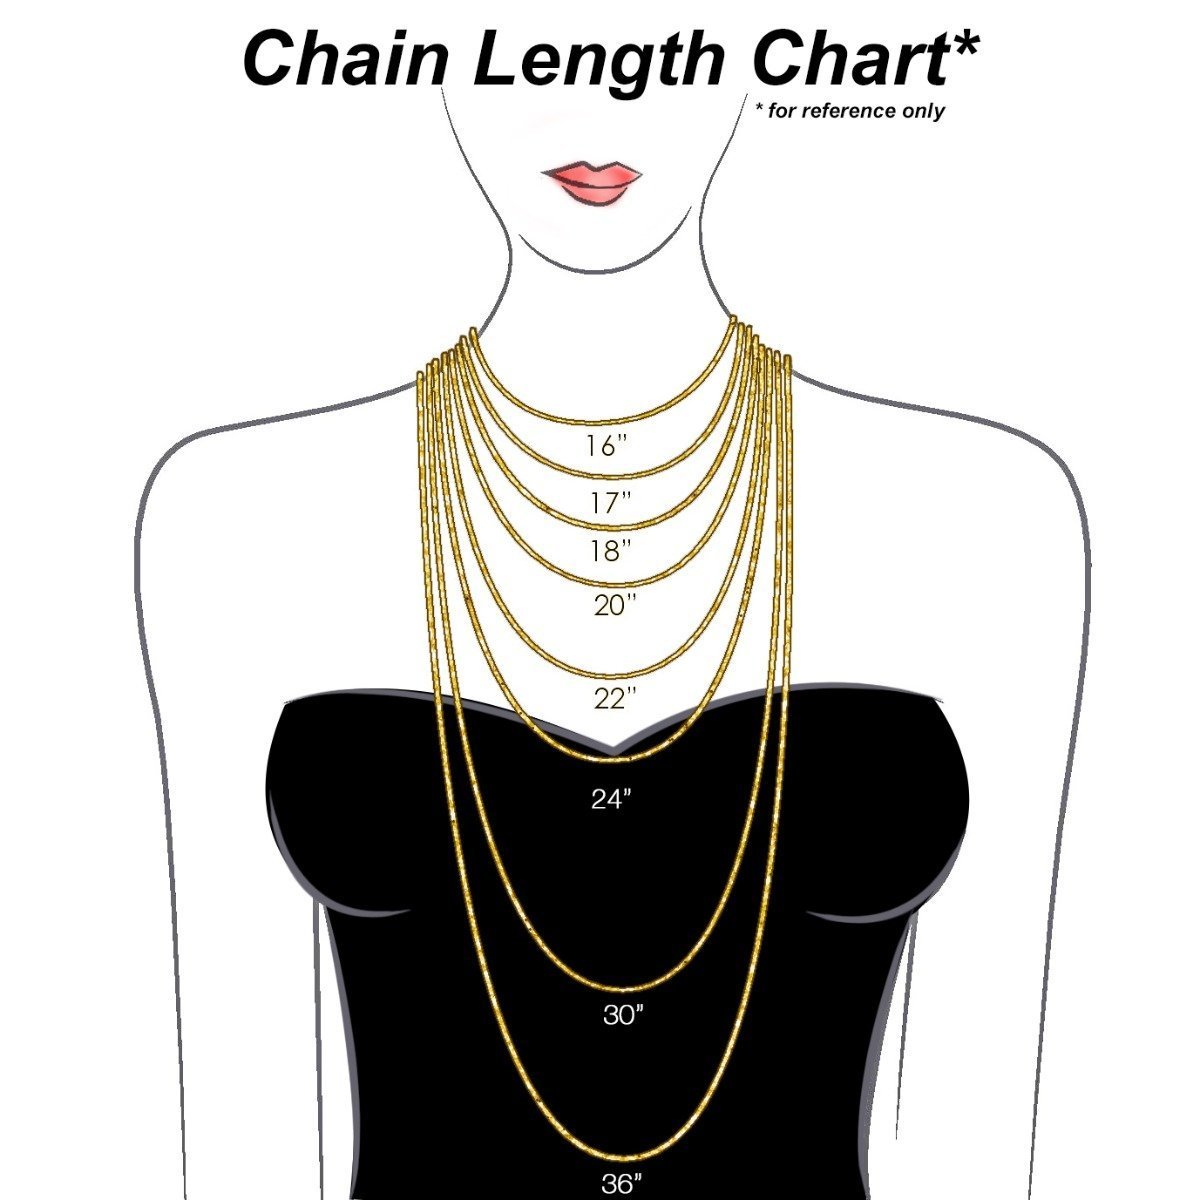 14KT Yellow Gold 3.8MM Concave Open Curb Chain - 5 Lengths 16 Inch,18 Inch,20 Inch,22 Inch,24 Inch